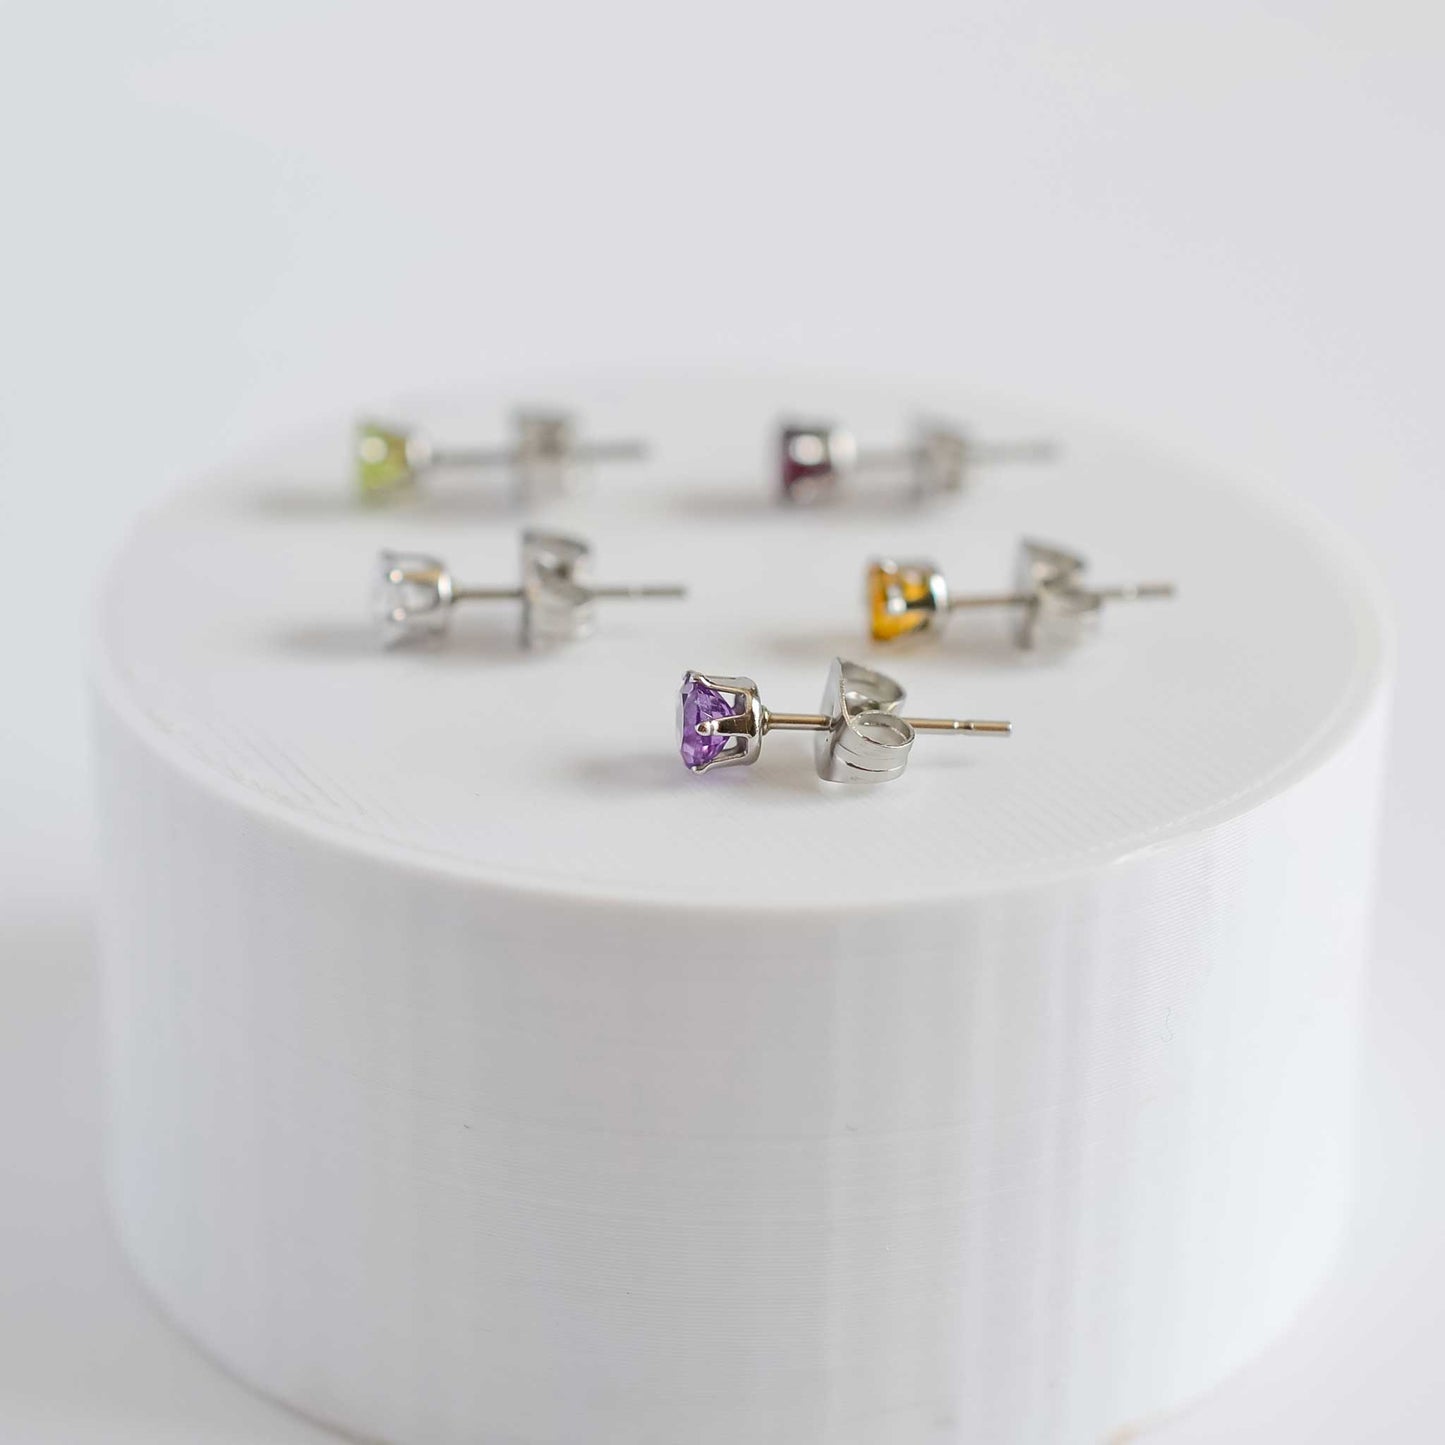 Side view of five small gemstone stud earrings on round white plinth